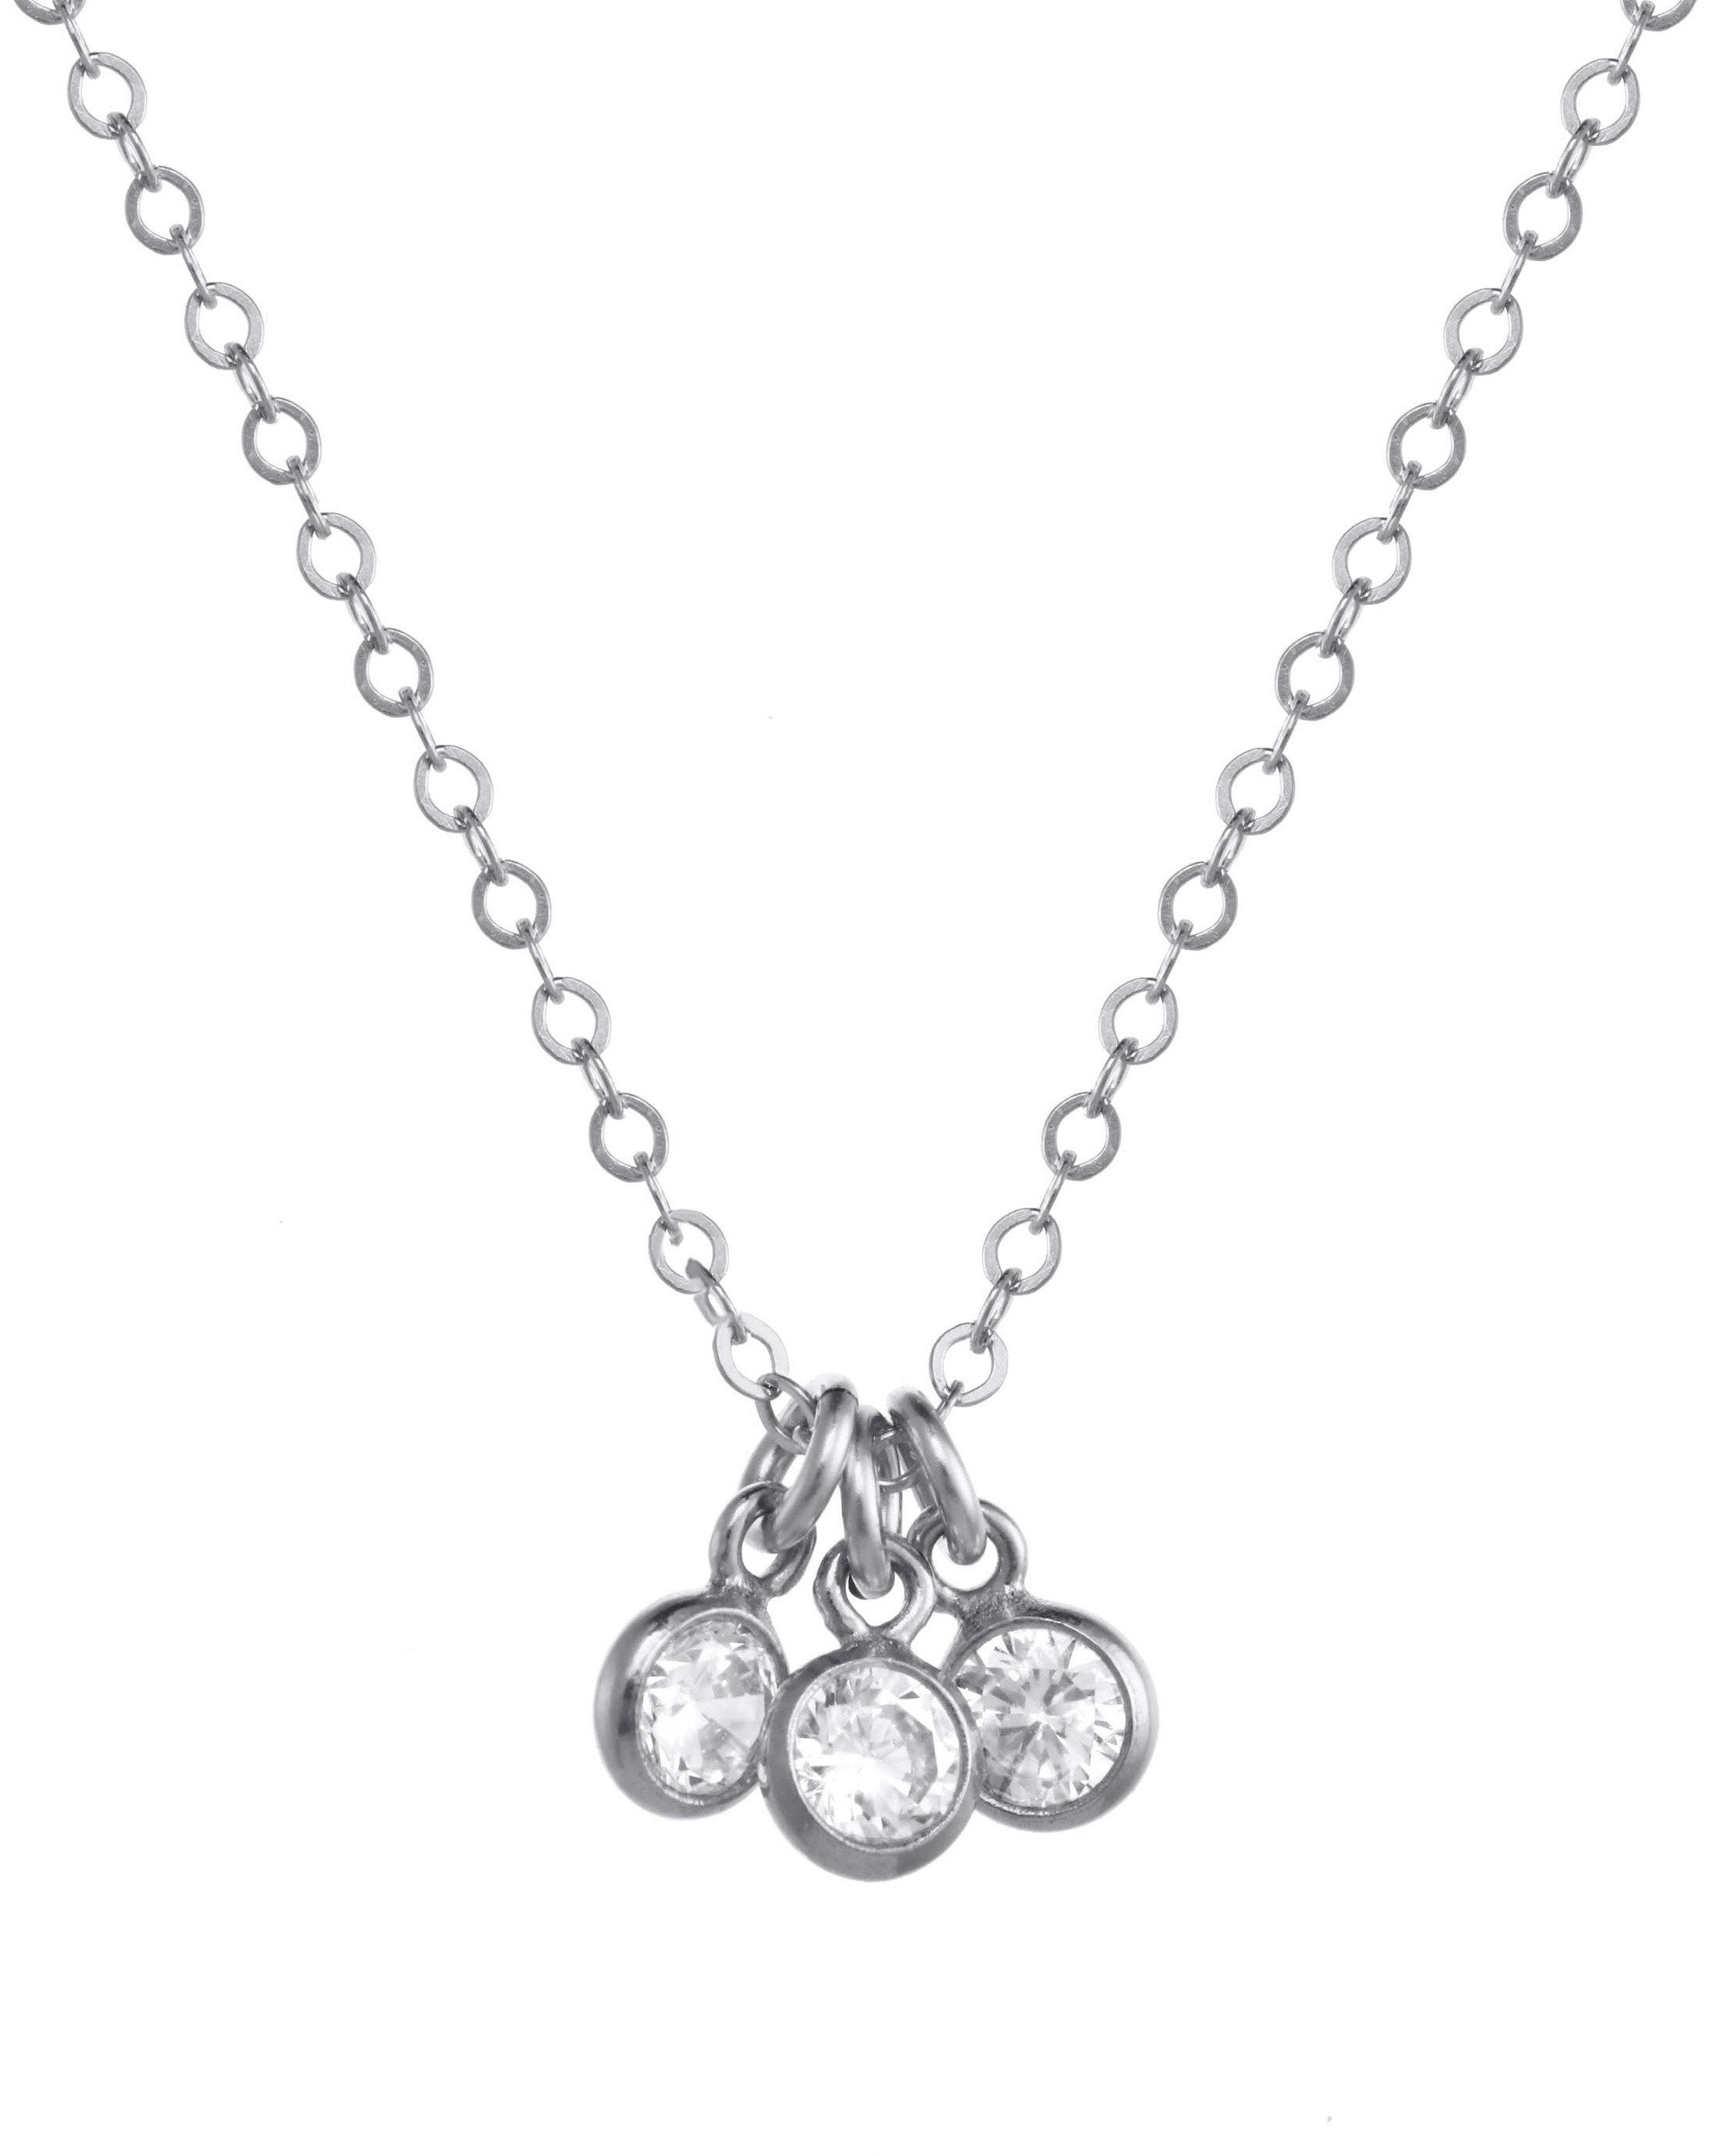 Trizare Necklace by KOZAKH. A 16 to 18 inch adjustable length necklace, crafted in Sterling Silver, featuring 3mm Cubic Zirconia bezels.